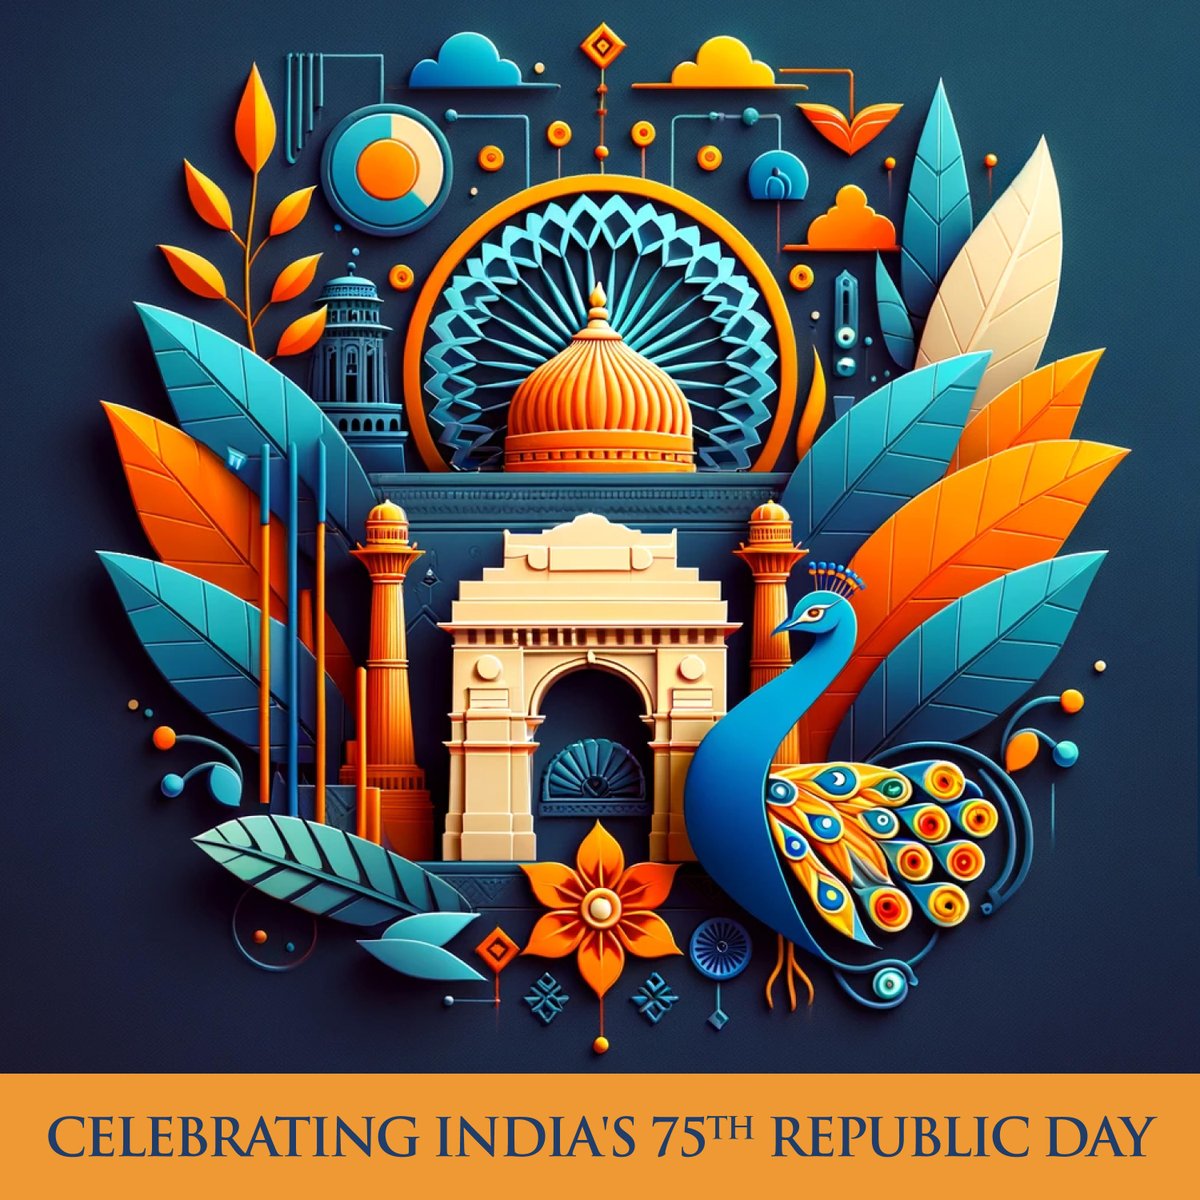 From resilience to progress, India's journey is a testament to the unstoppable #EntrepreneurialSpirit.  On this #RepublicDay, @SilverneedleV salutes the #Visionaries & #Dreamers who are shaping the future through #Startups. 

#HappyRepublicDay #India75 #ProudIndian #JaiHind 🇮🇳